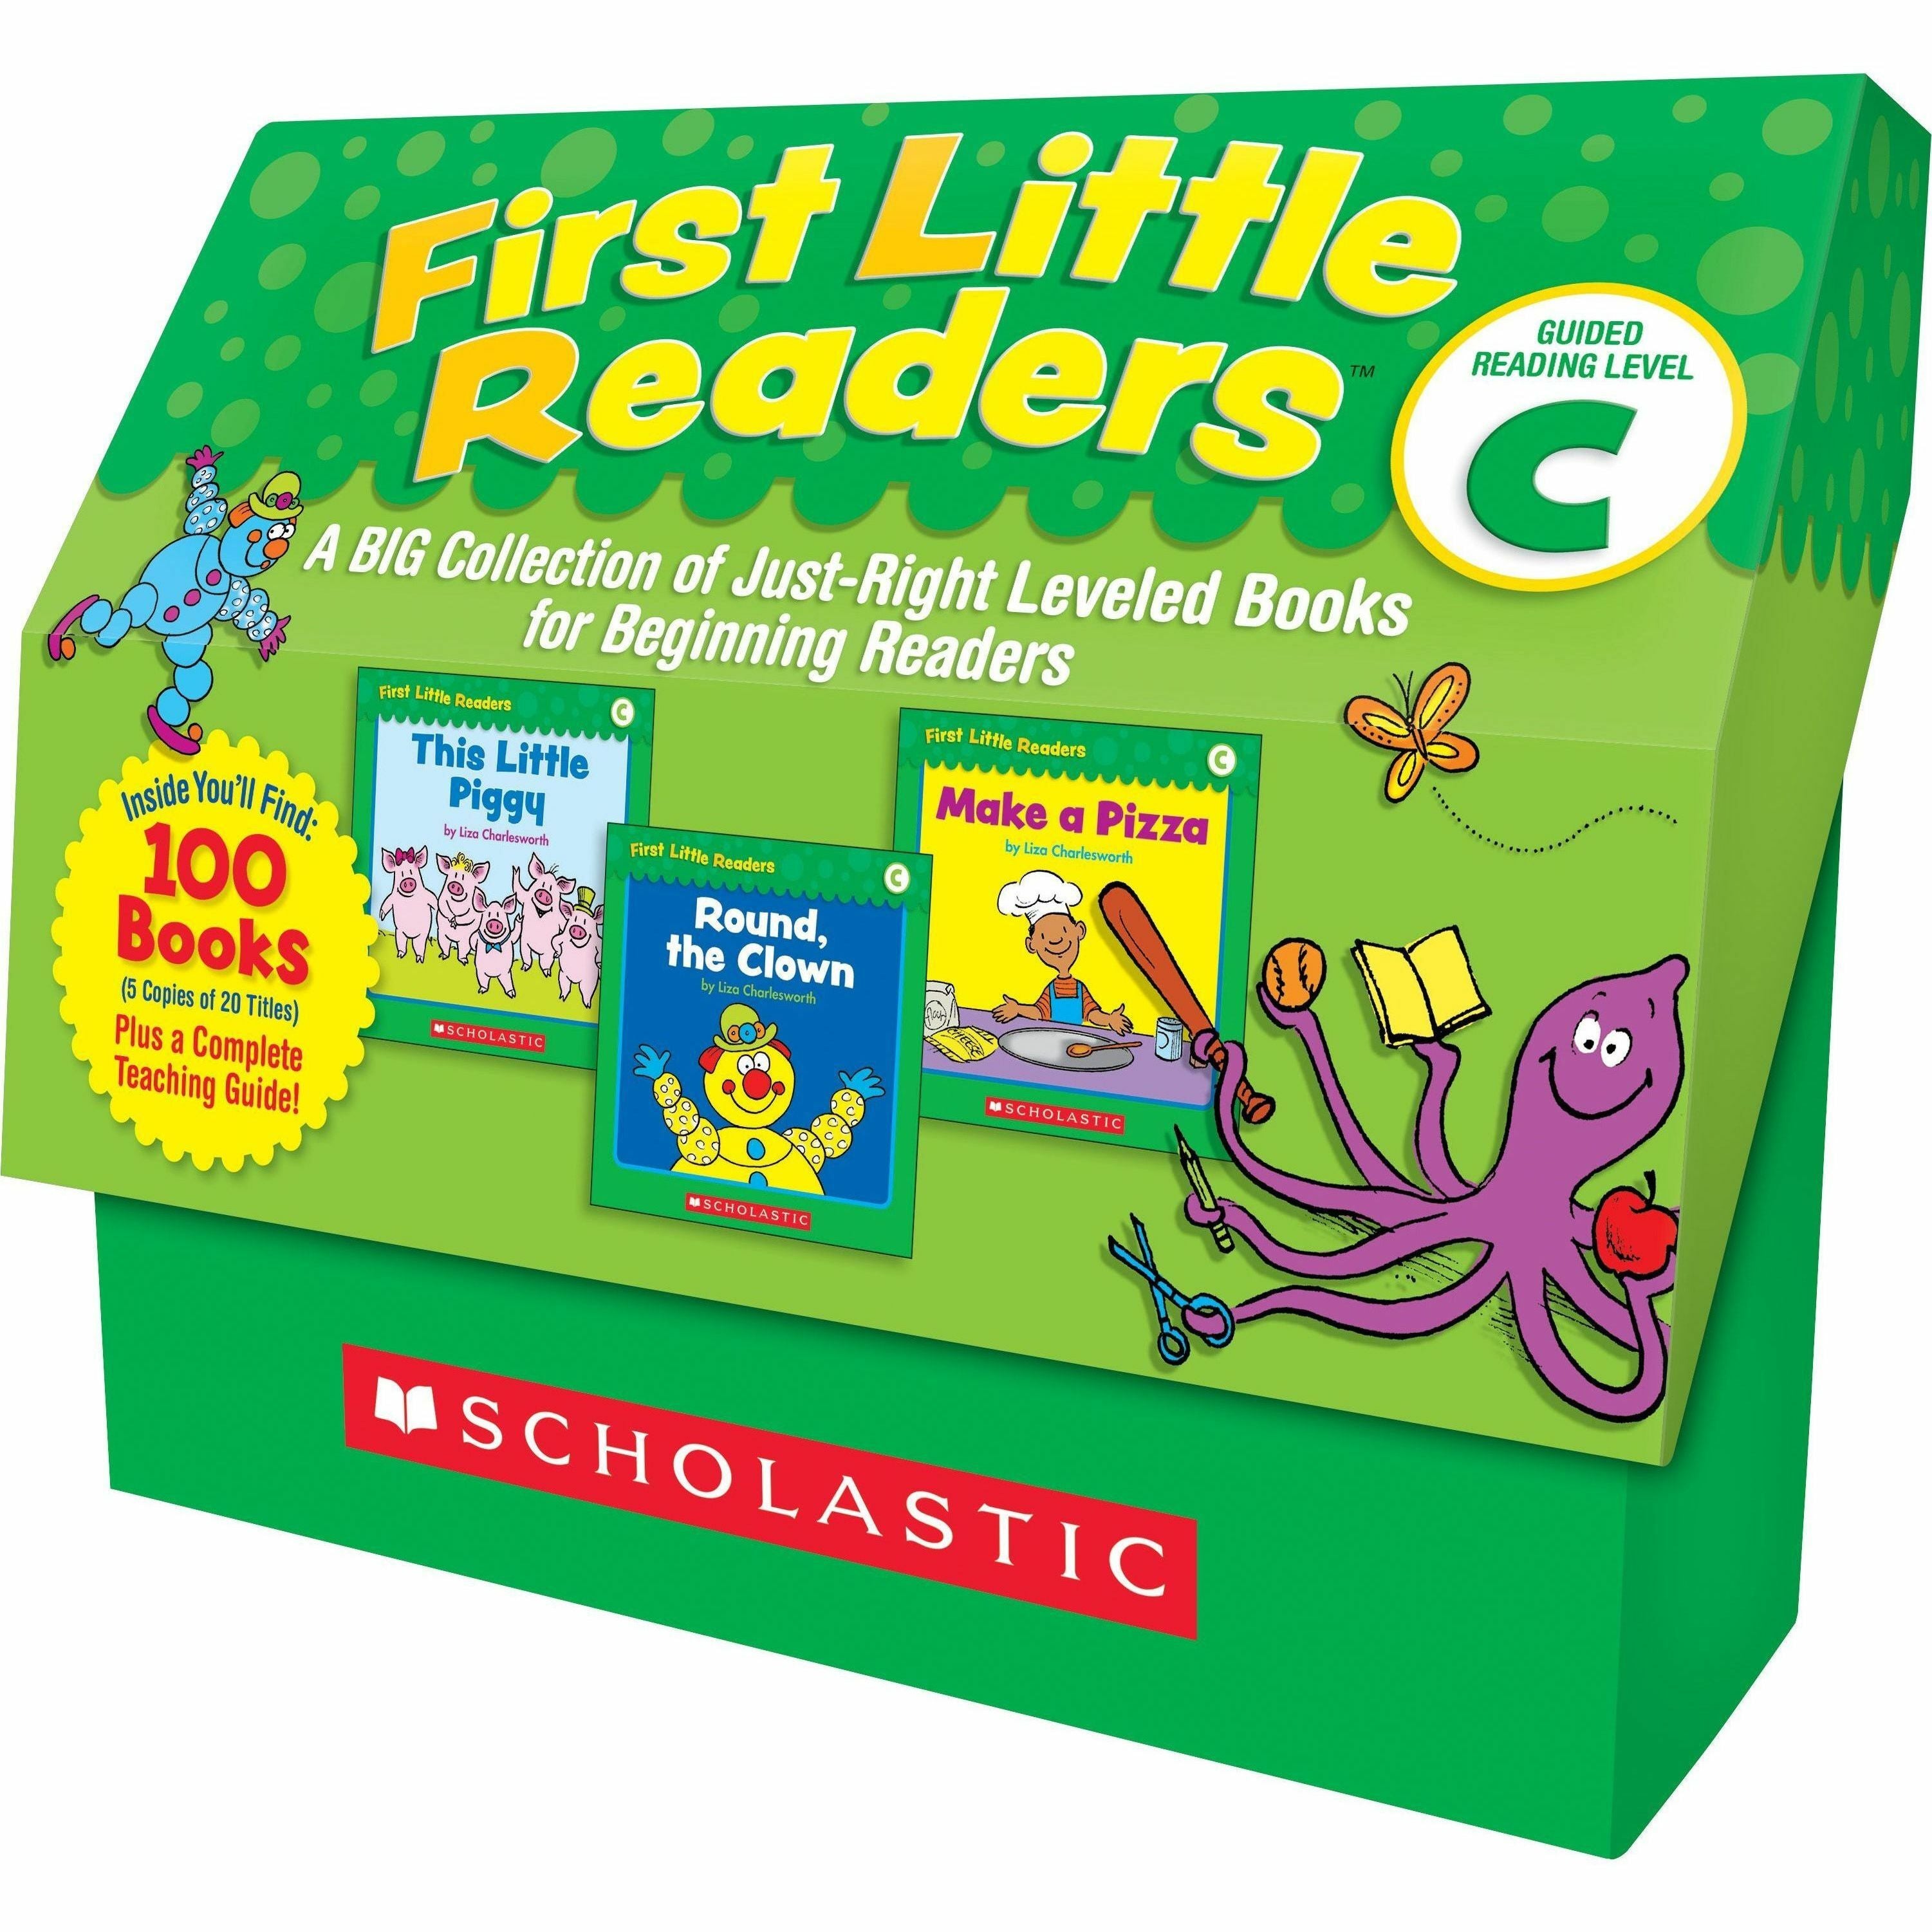 Scholastic Res. Level C 1st Little Readers Book Set Printed Book by Liza Charlesworth - Scholastic Teaching Resources Publication - 2010 September 01 - Book - Grade Preschool-2 - English - 